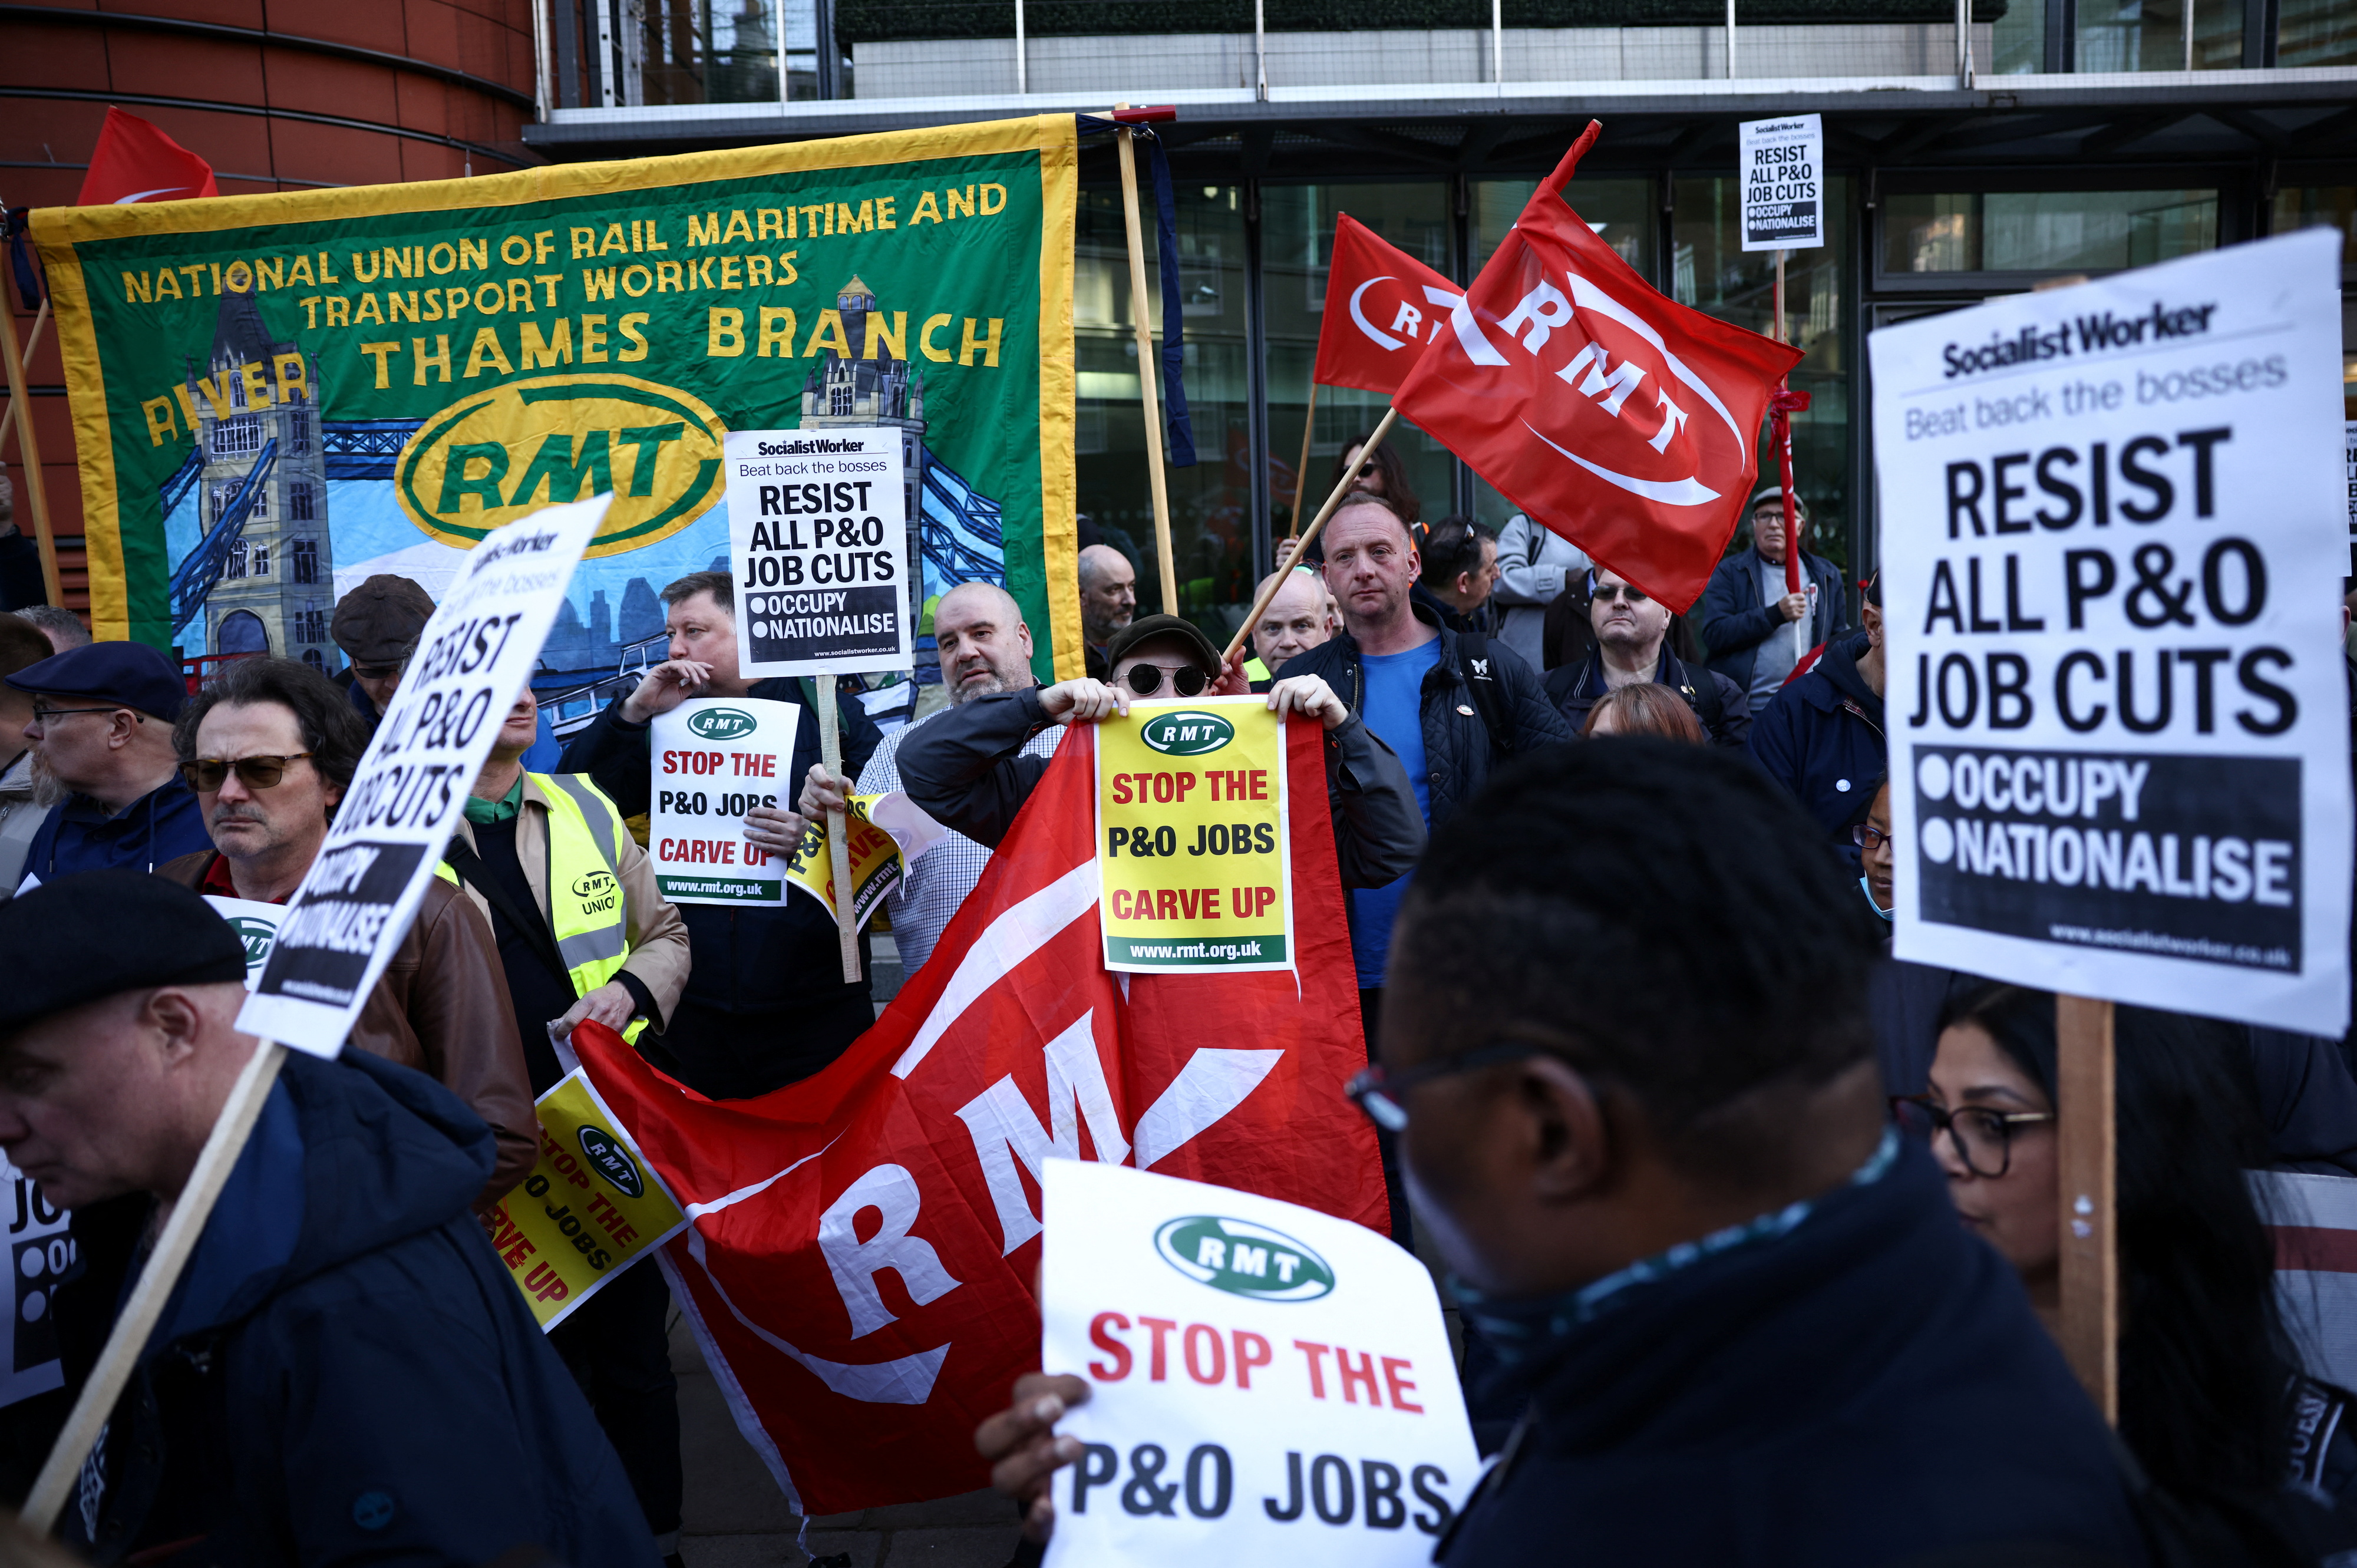 People protest outside the offices of DP World, who own P&O Ferries, after the company fired hundreds of employees, in London